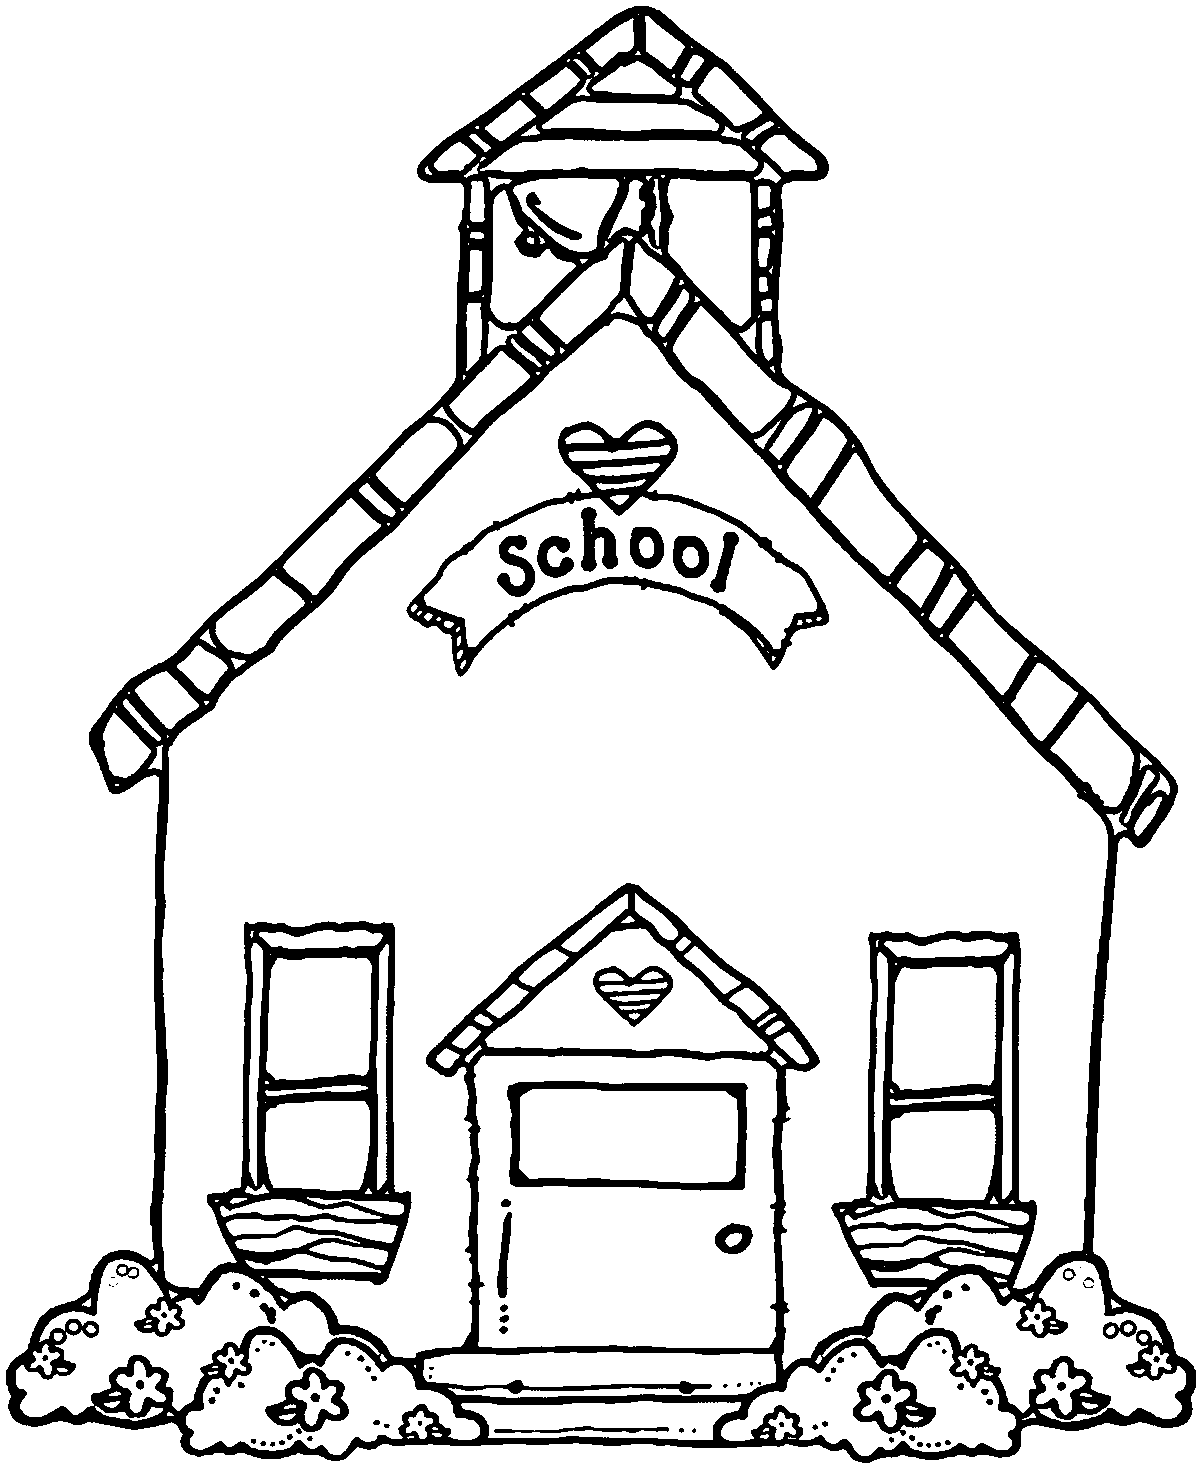 School House Clipart - GIF Image #18517